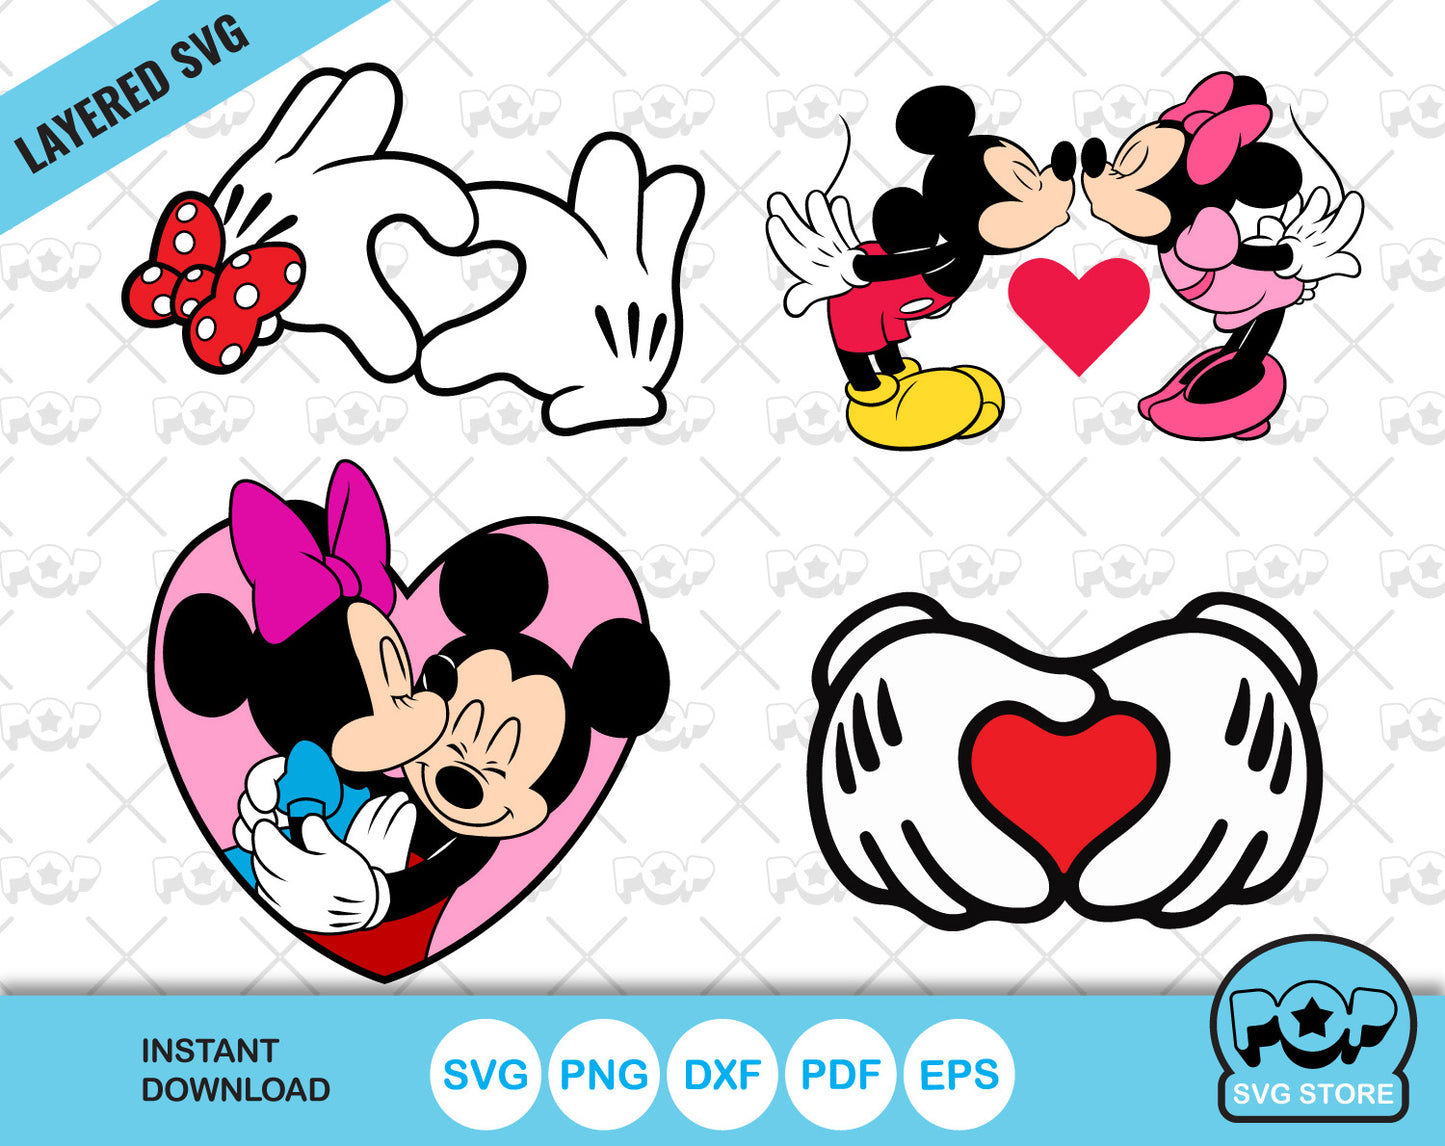 Mickey and Minnie Valentine's Day clipart, SVG cut files for Cricut / Silhouette, instant download